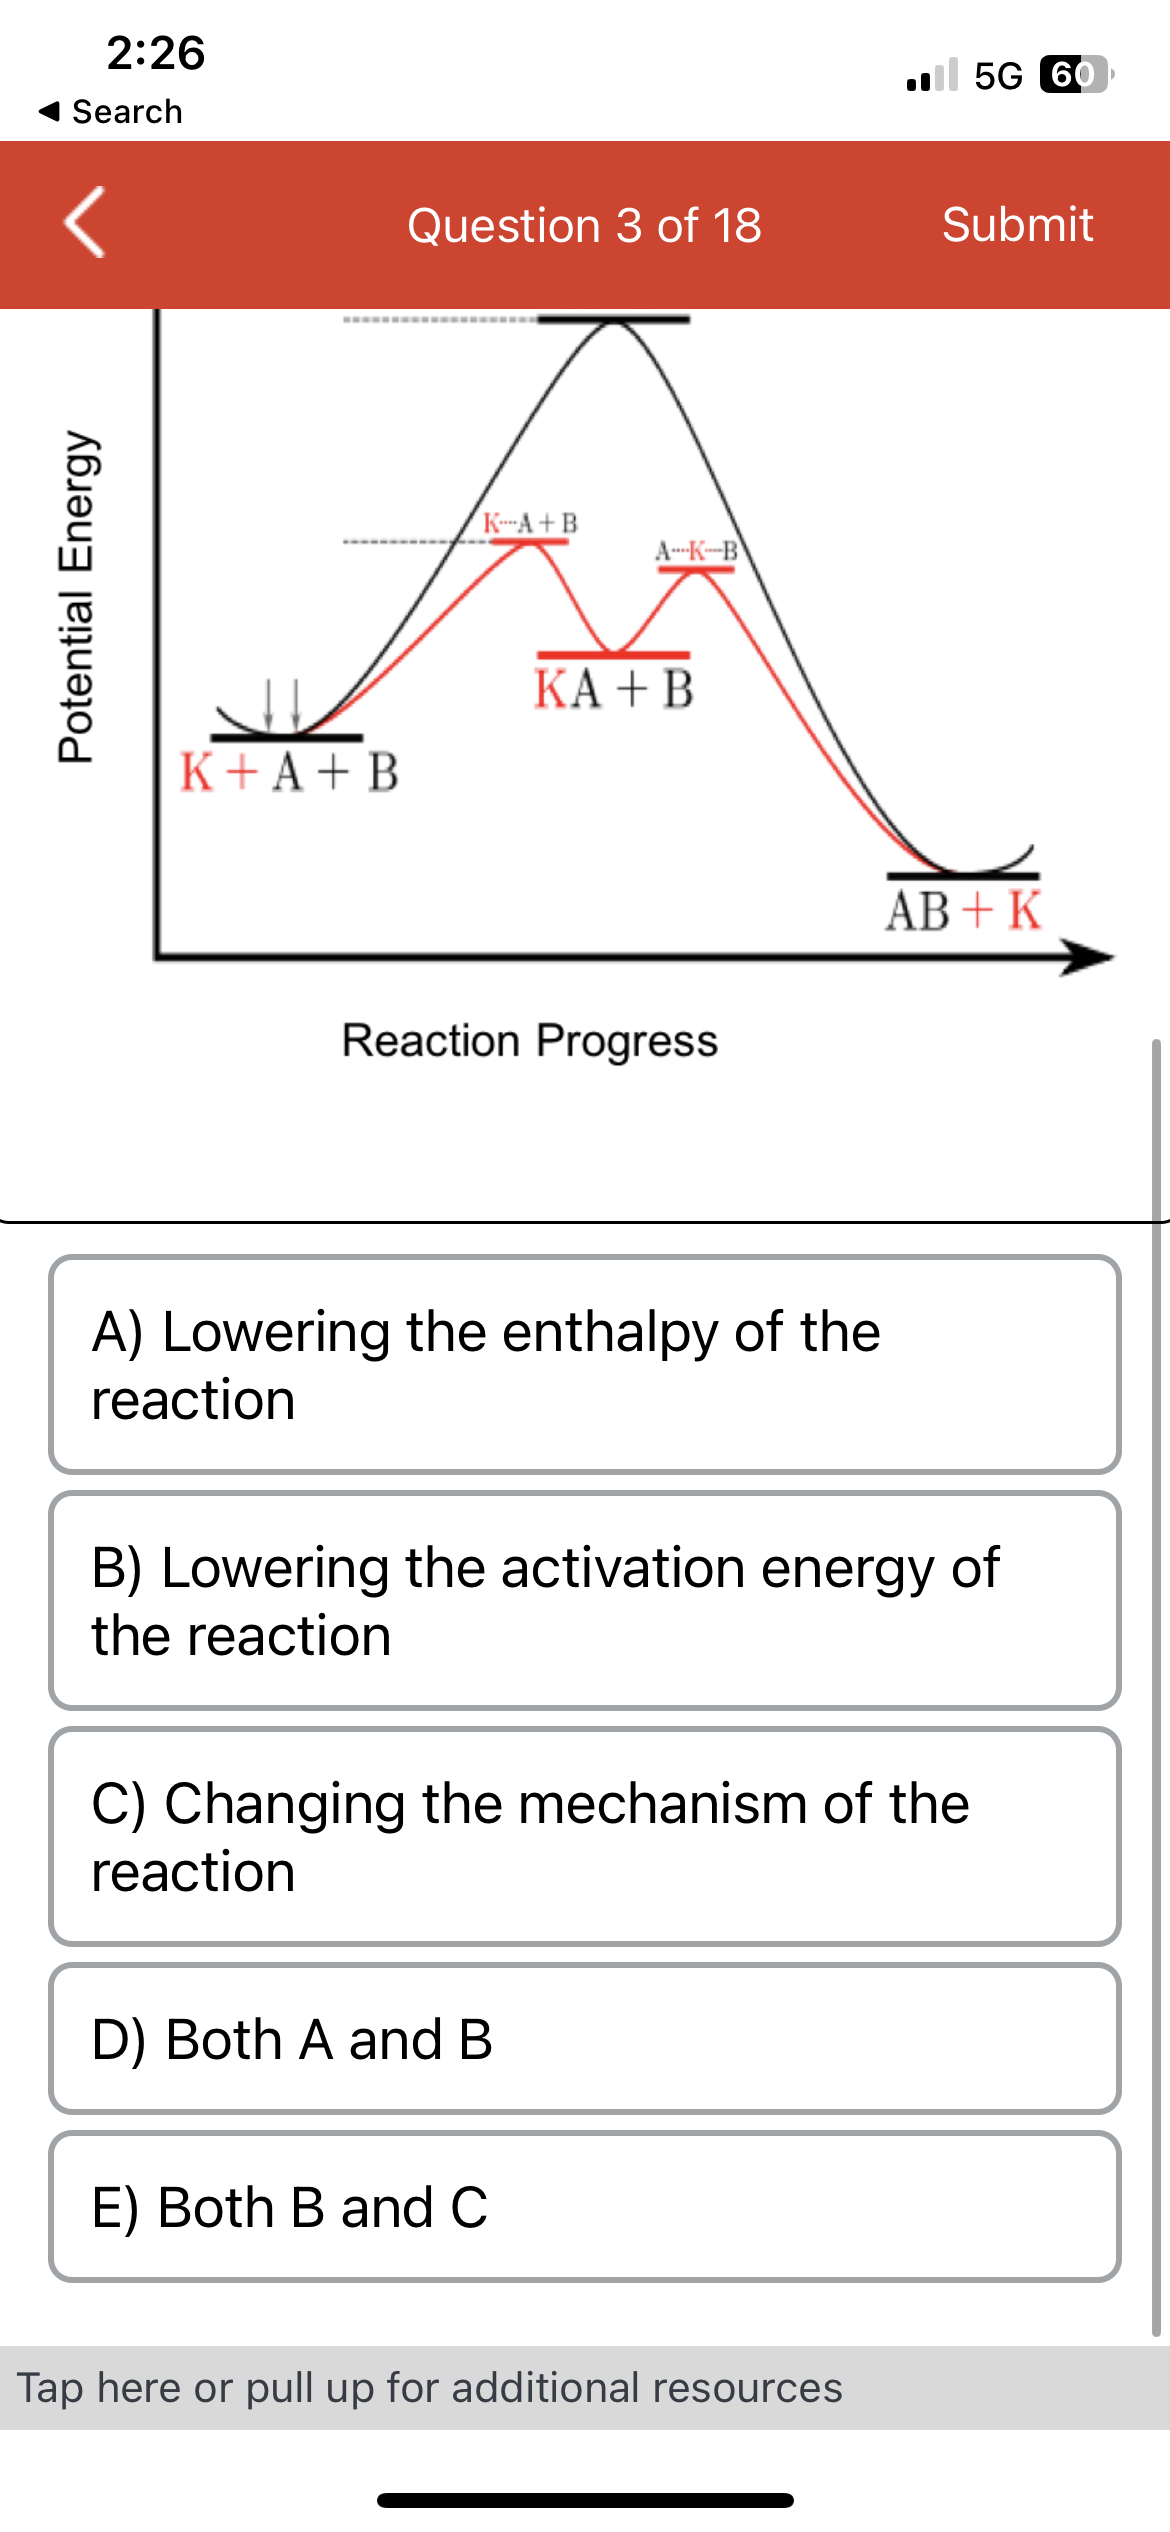 2:26
Search
Potential Energy
K+A+B
Question 3 of 18
K-A+B
A-K-B
Reaction Progress
KA + B
A) Lowering the enthalpy of the
reaction
D) Both A and B
E) Both B and C
B) Lowering the activation energy of
the reaction
C) Changing the mechanism of the
reaction
5G 60
Submit
Tap here or pull up for additional resources
AB + K